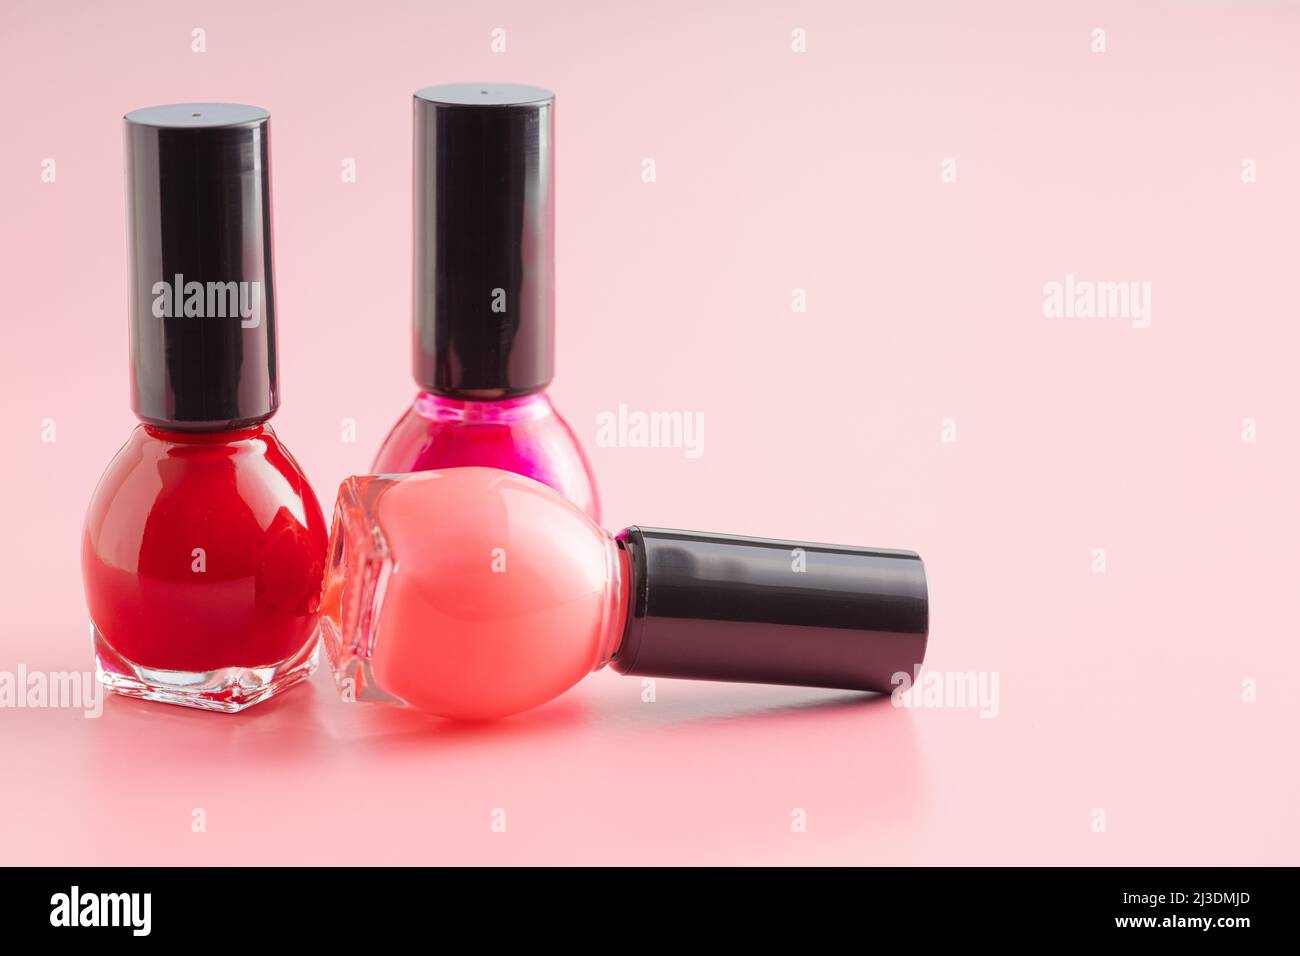 Colorful nail polish bottles on a pink background. Stock Photo